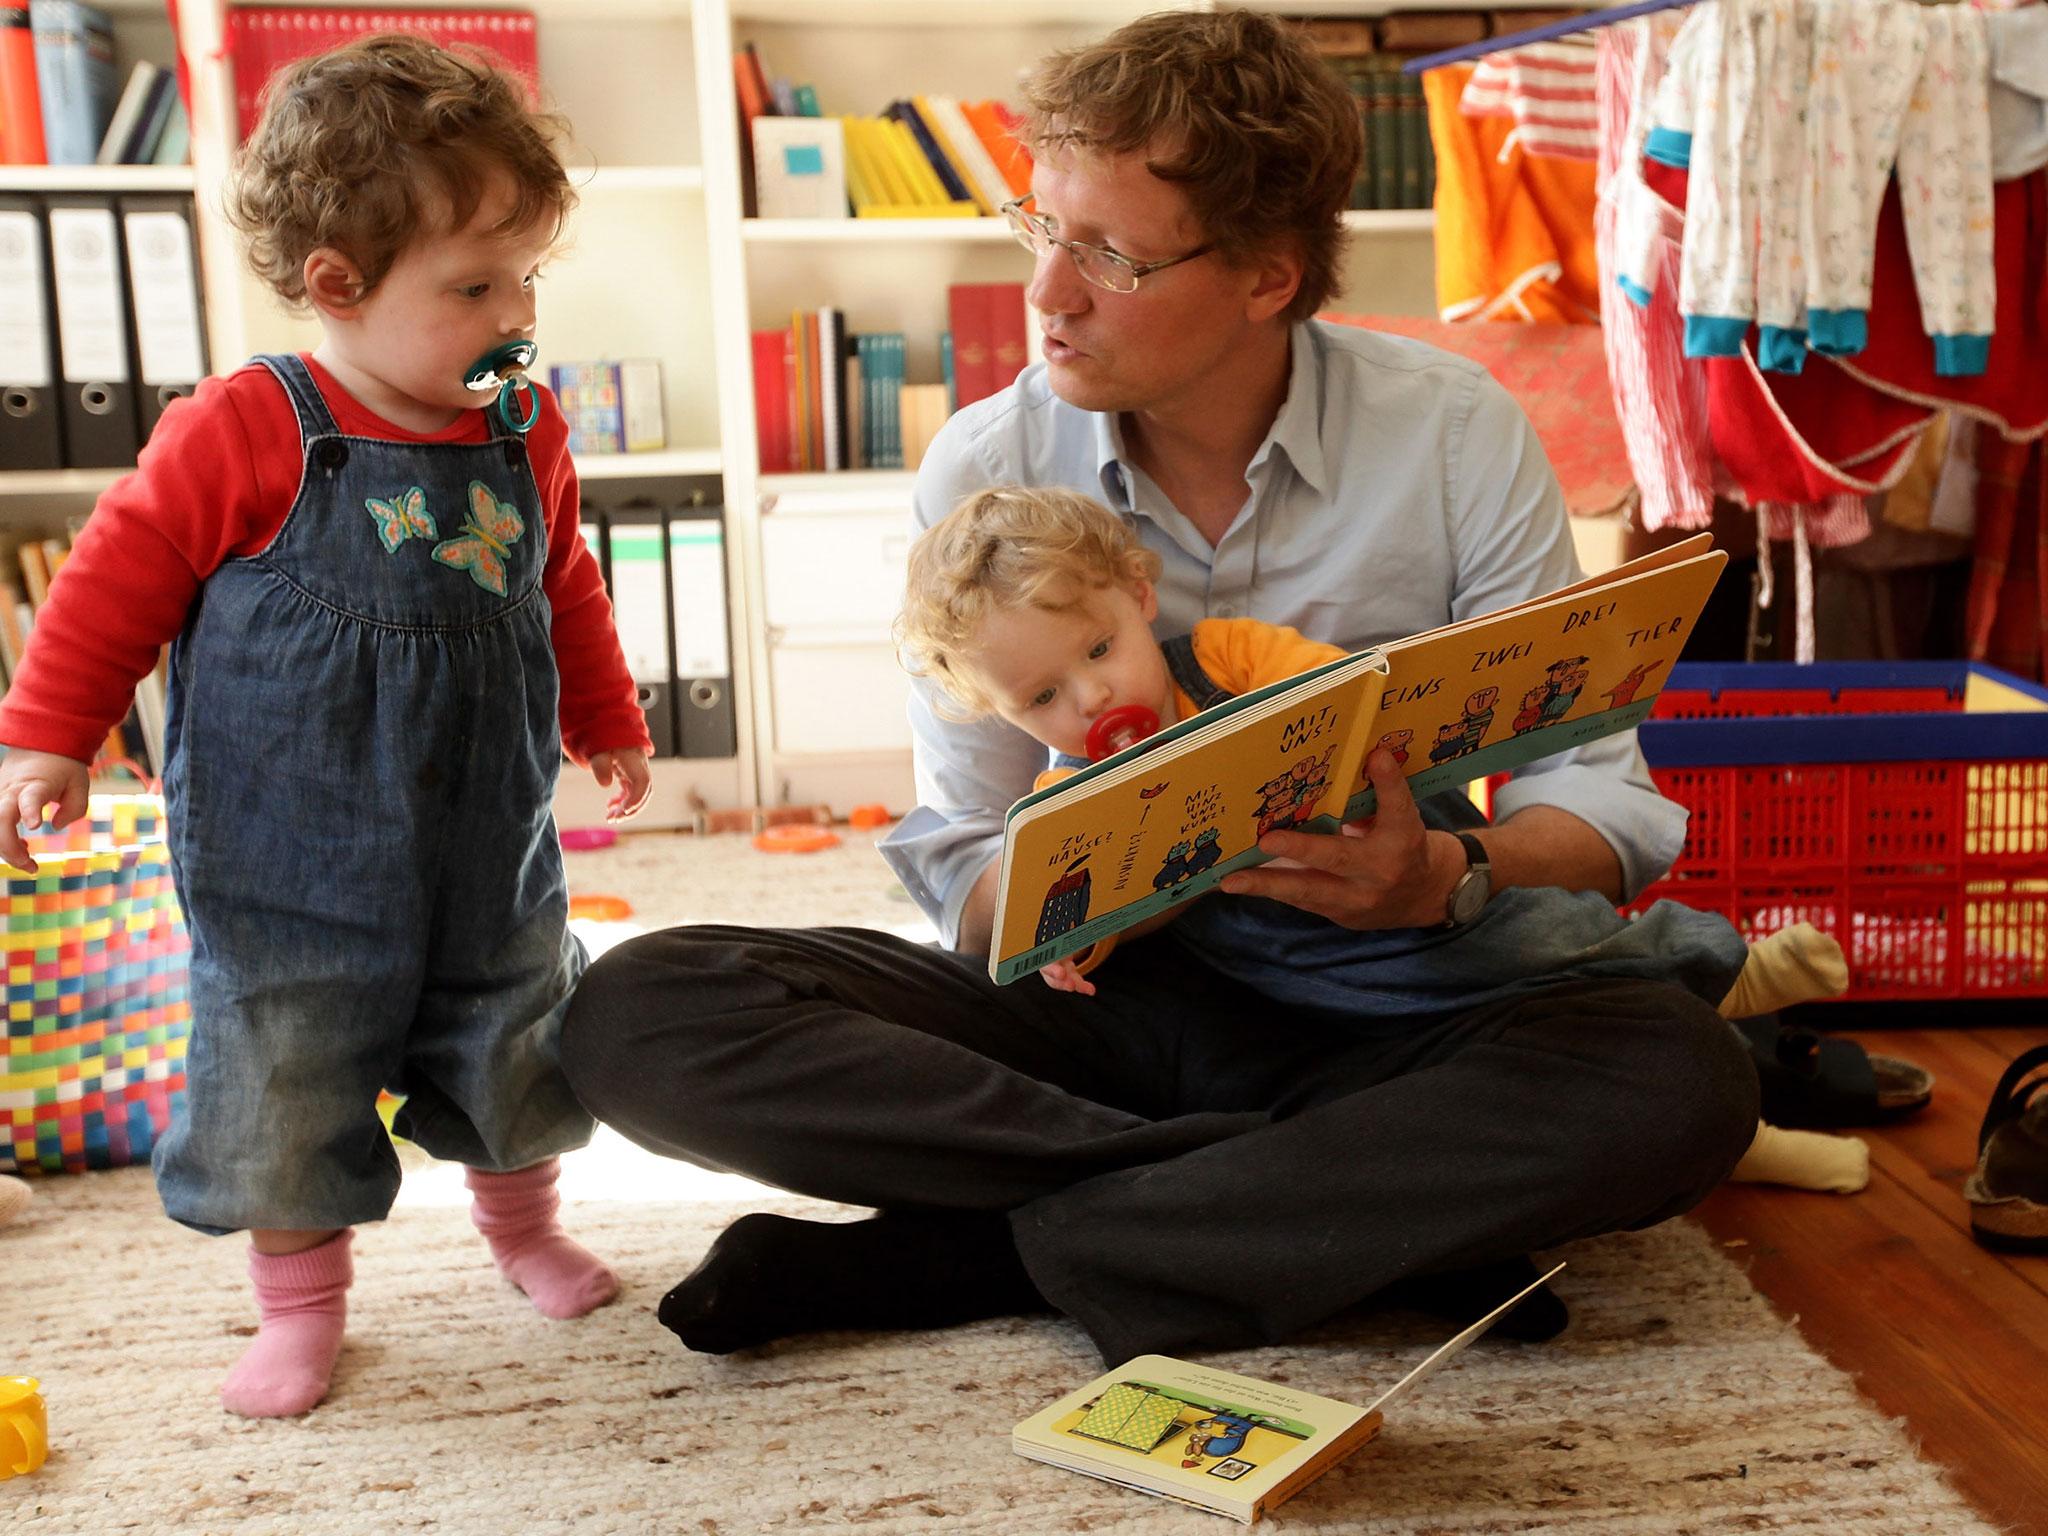 Aviva's policy will allow fathers to play a greater role in child care